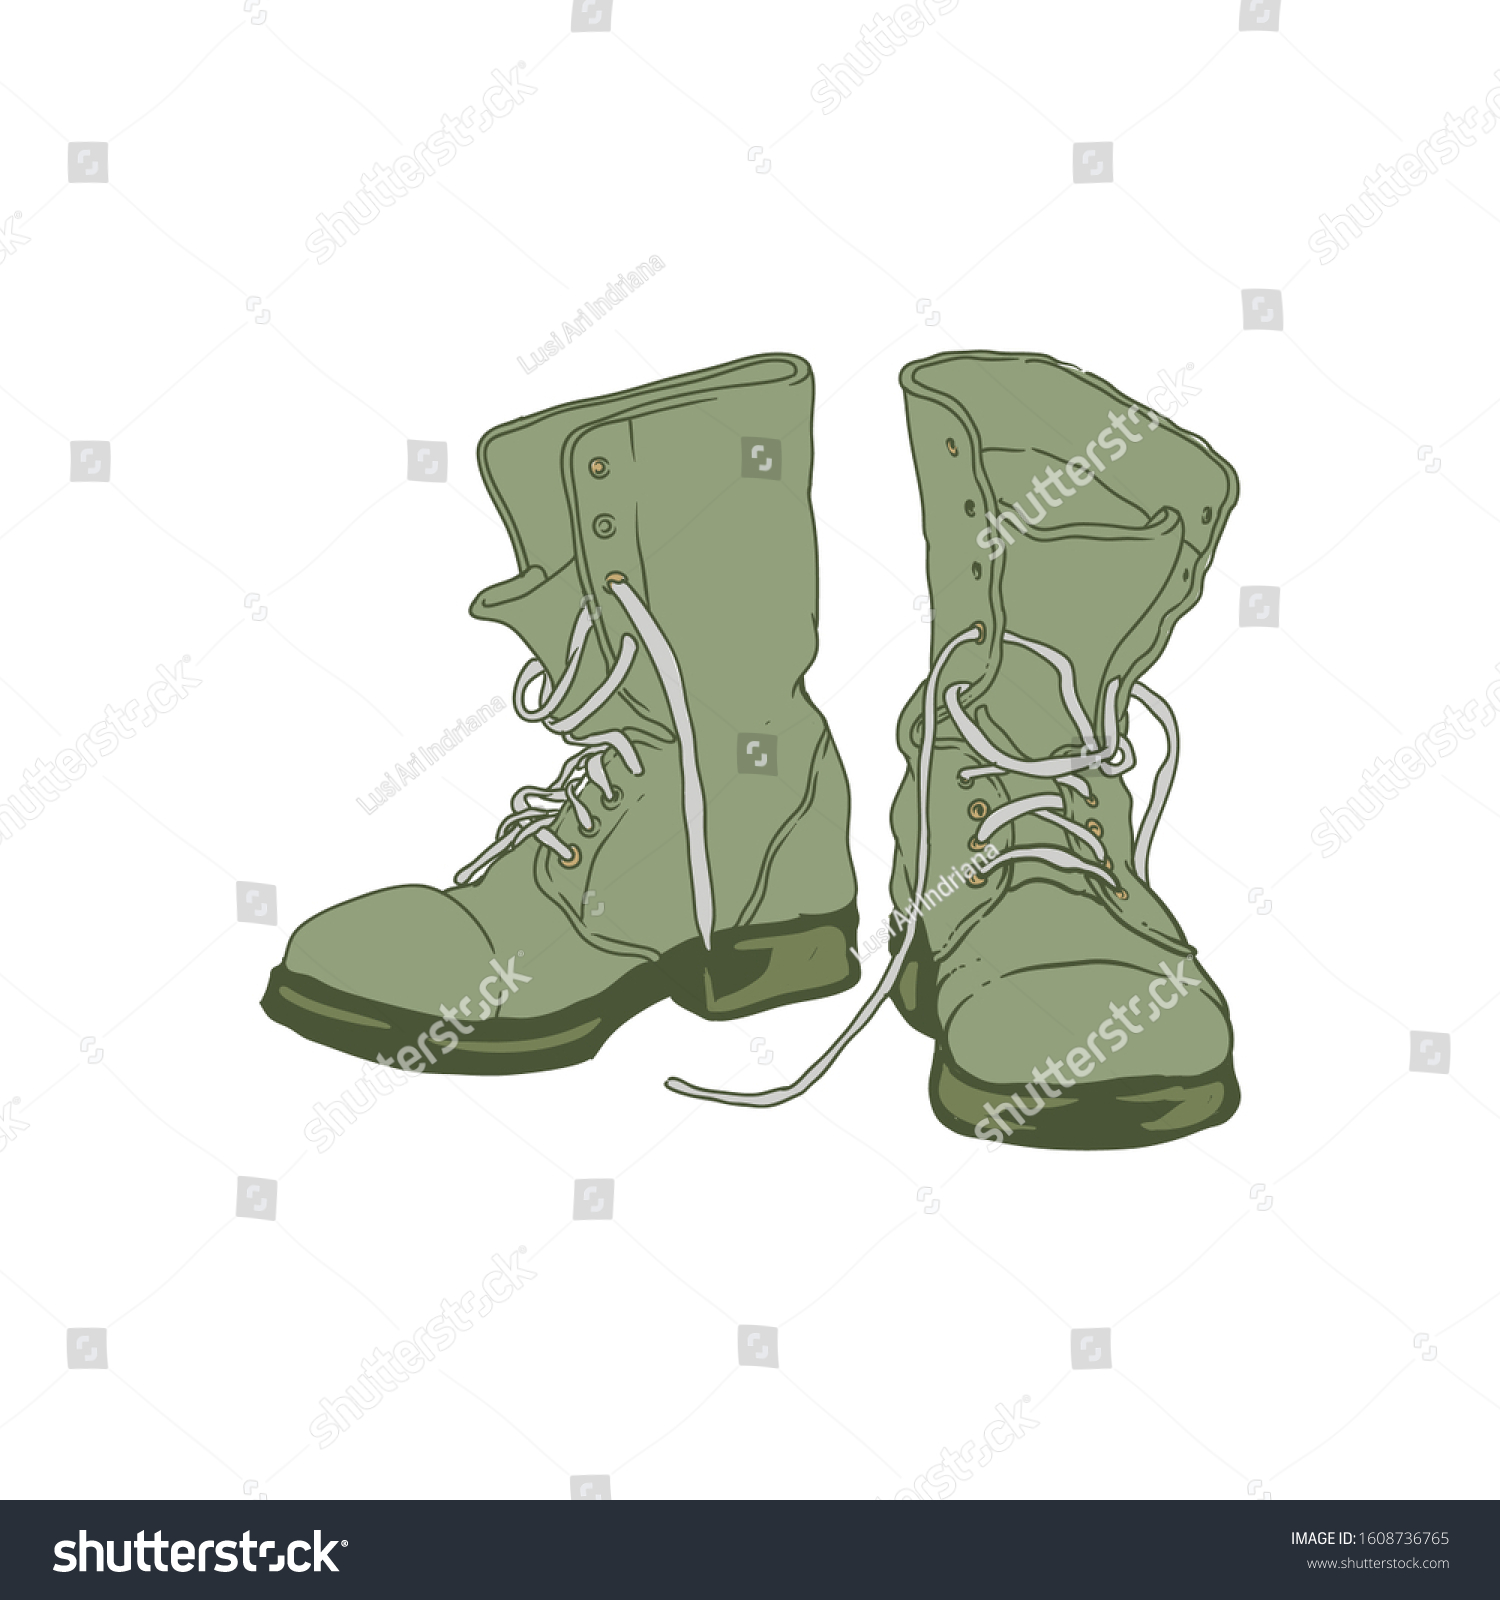 2,447 Police boots Stock Illustrations, Images & Vectors | Shutterstock